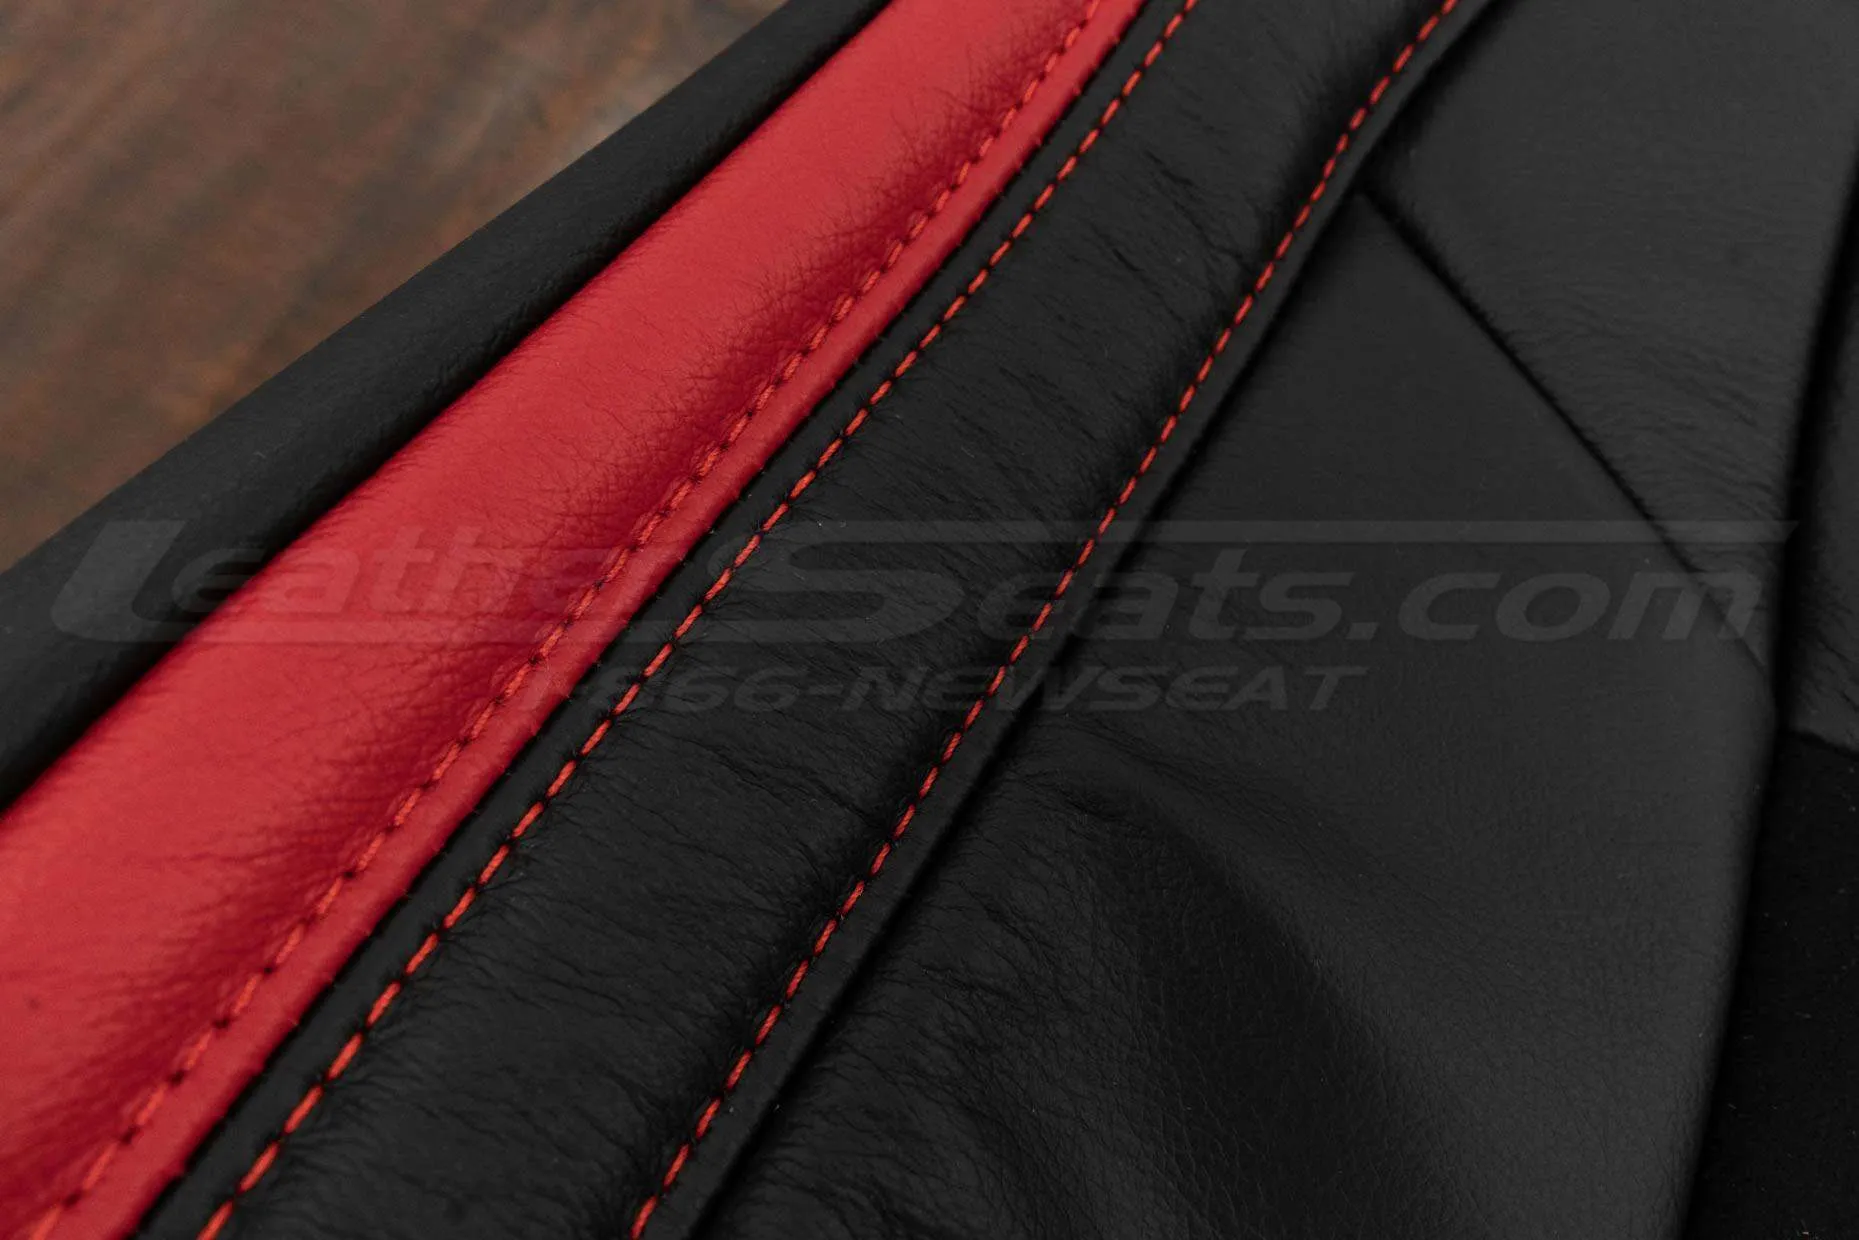 Contrasting Bright Red stitching